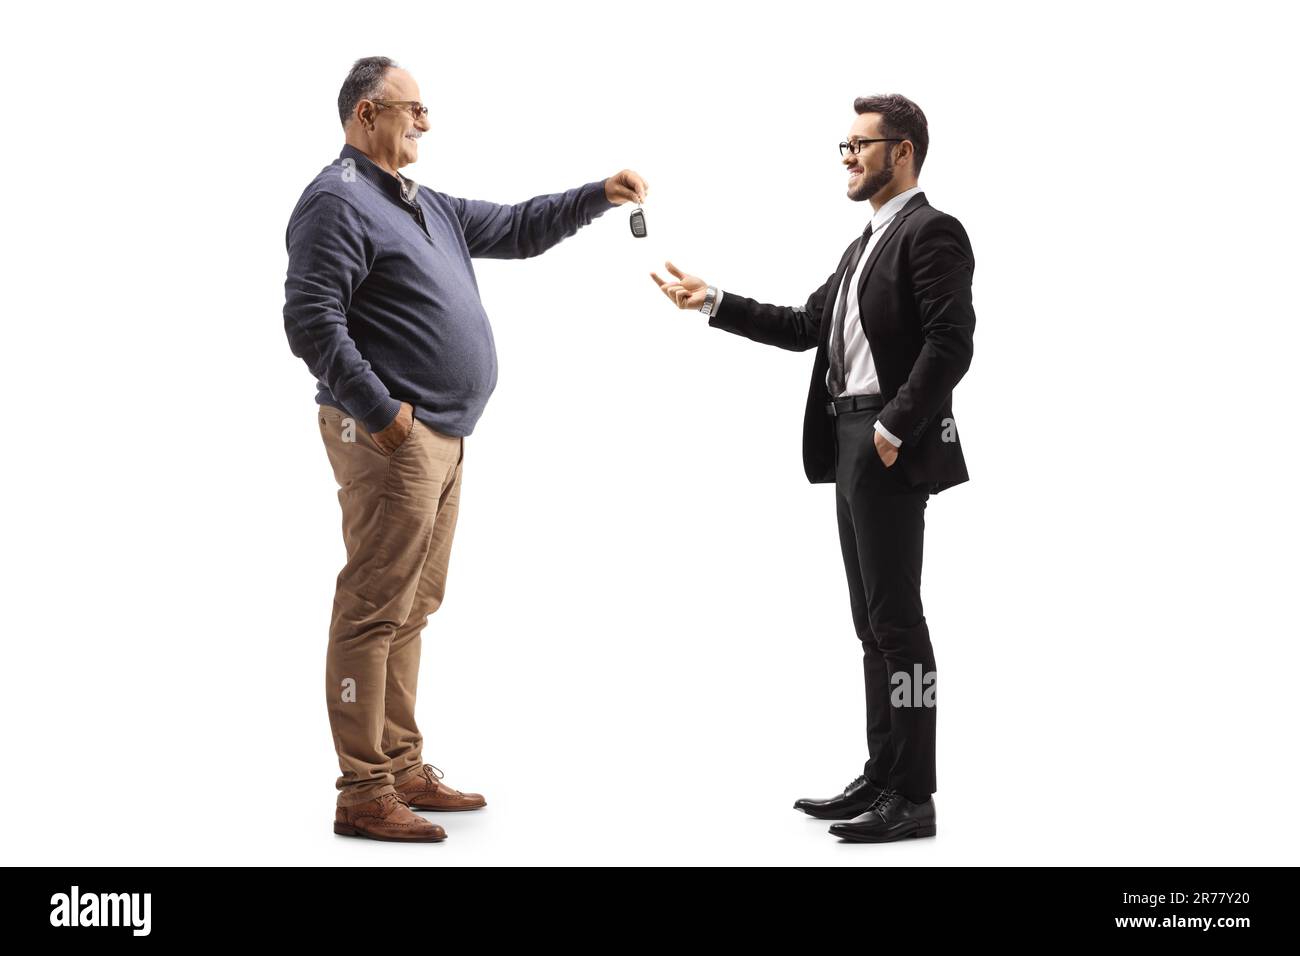 Mature man handing car keys to a businessman isolated on white background Stock Photo